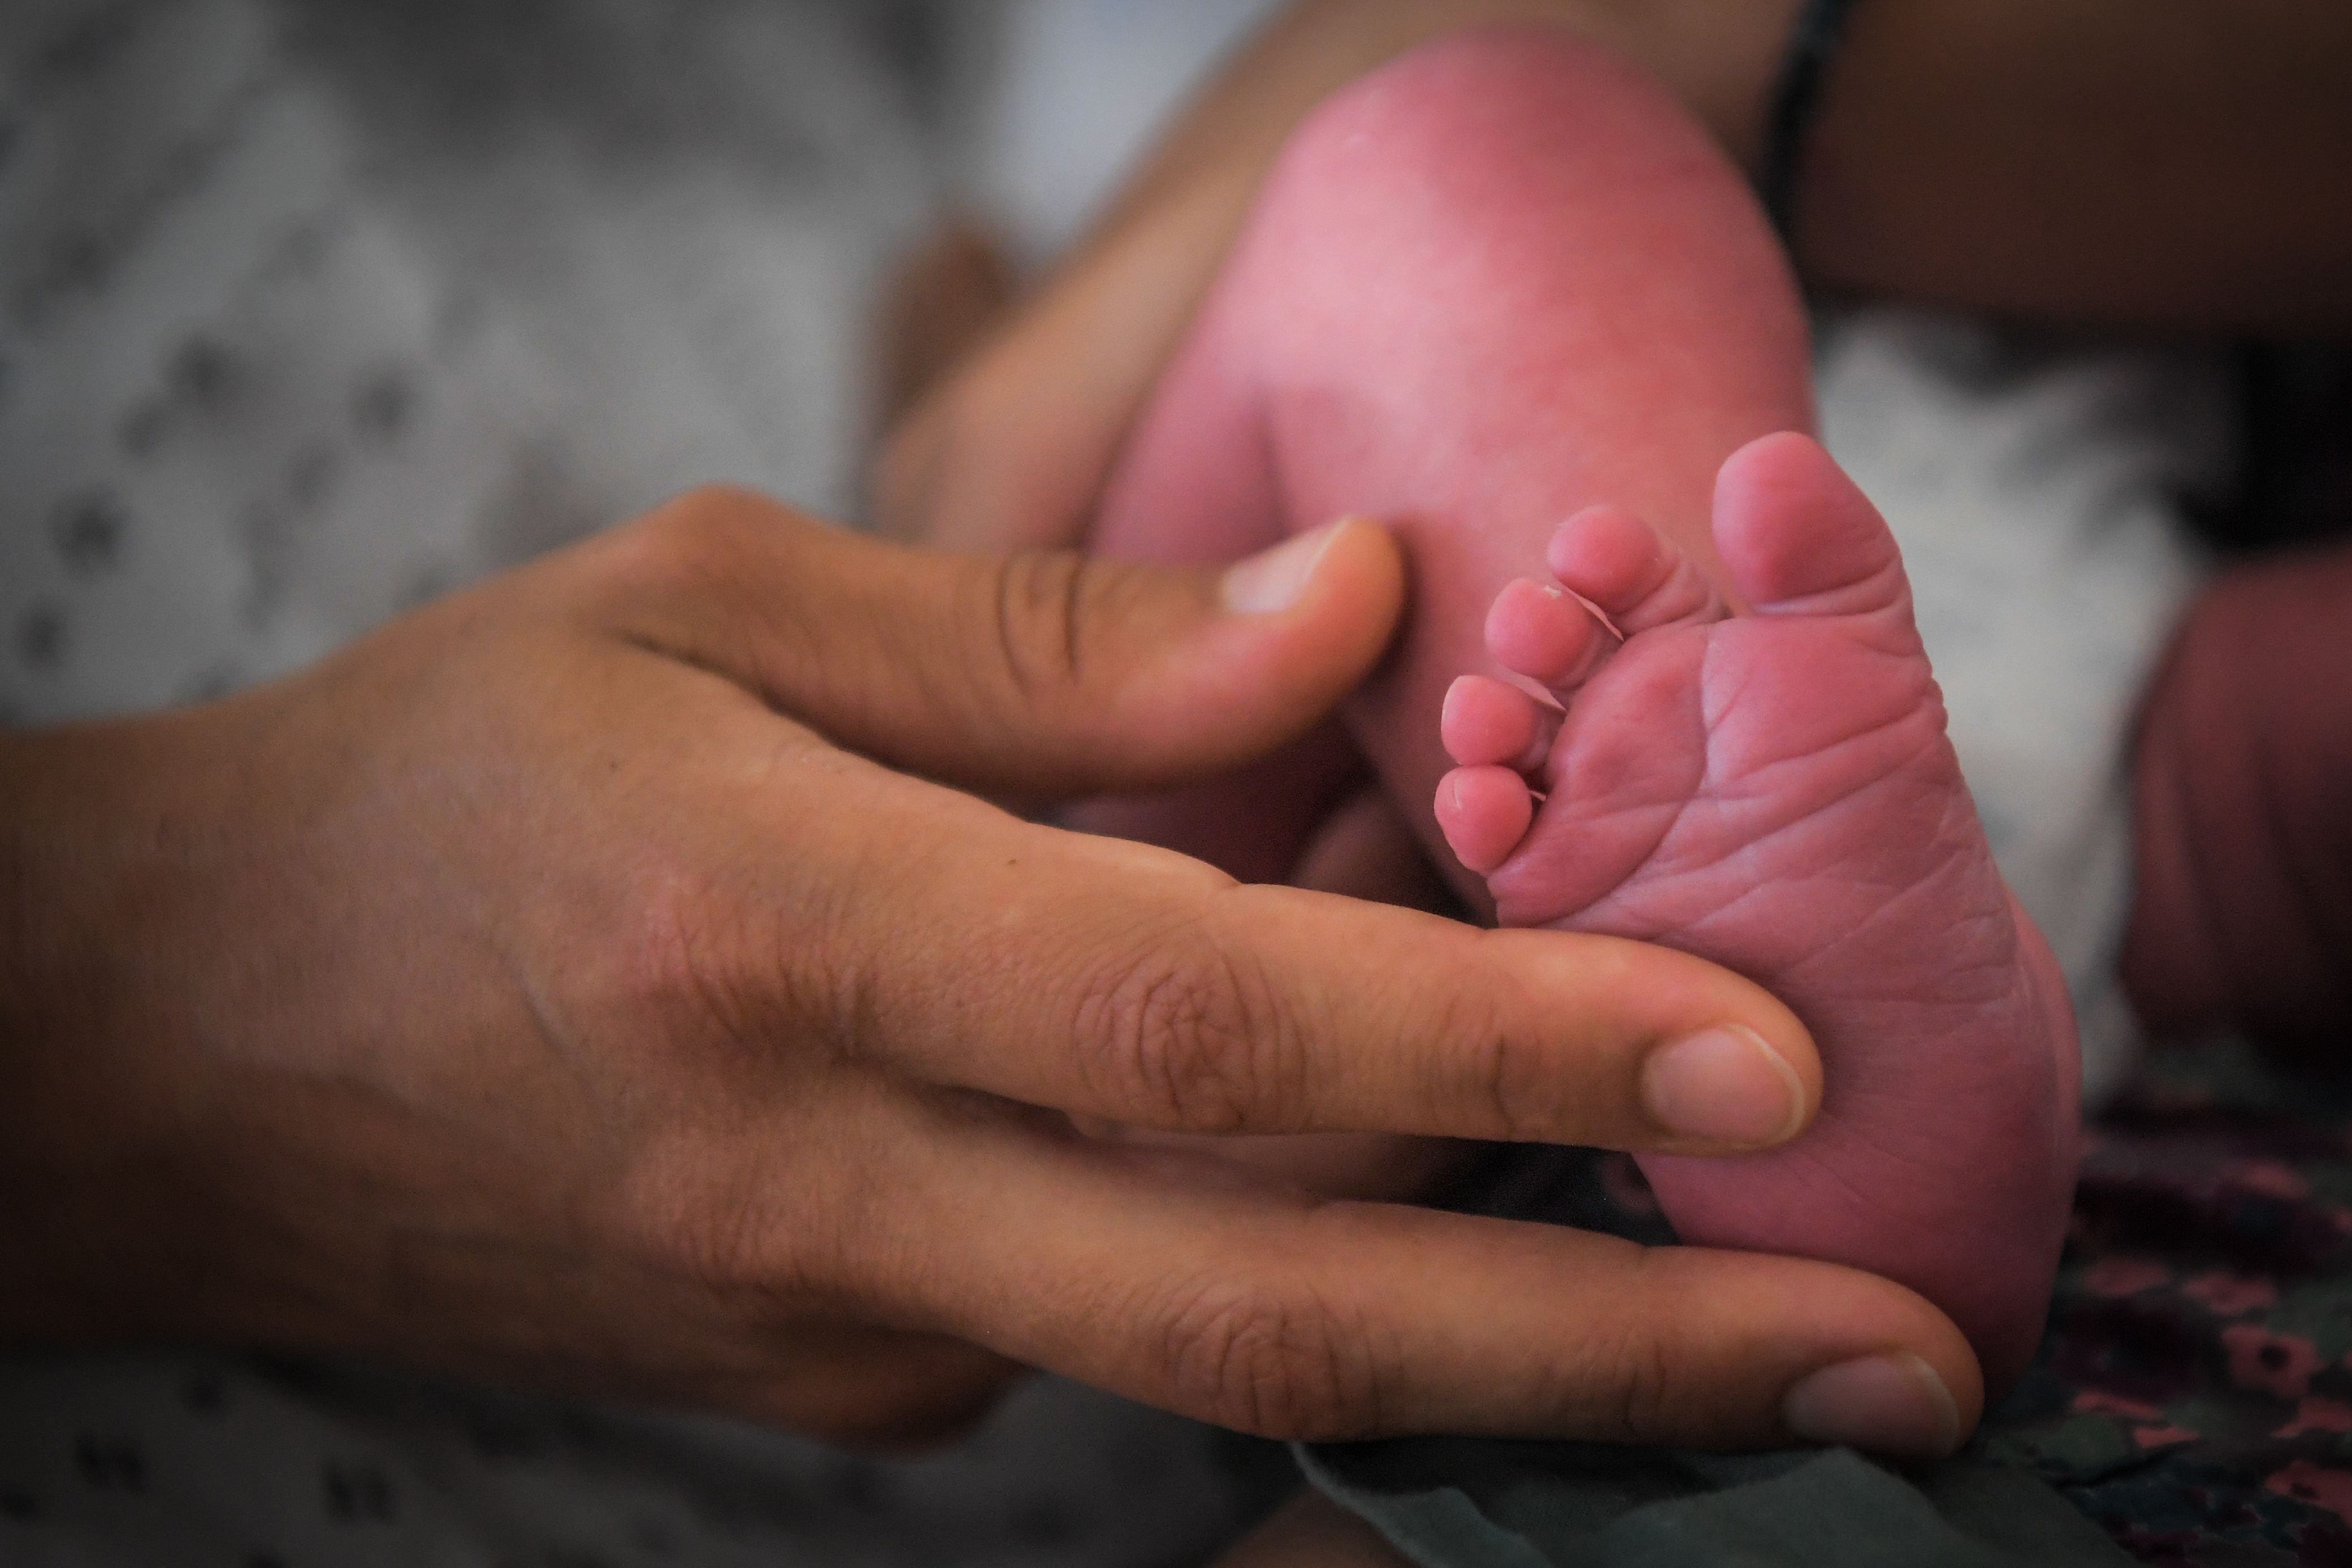 Representational: A mother holds the foot of her newborn baby